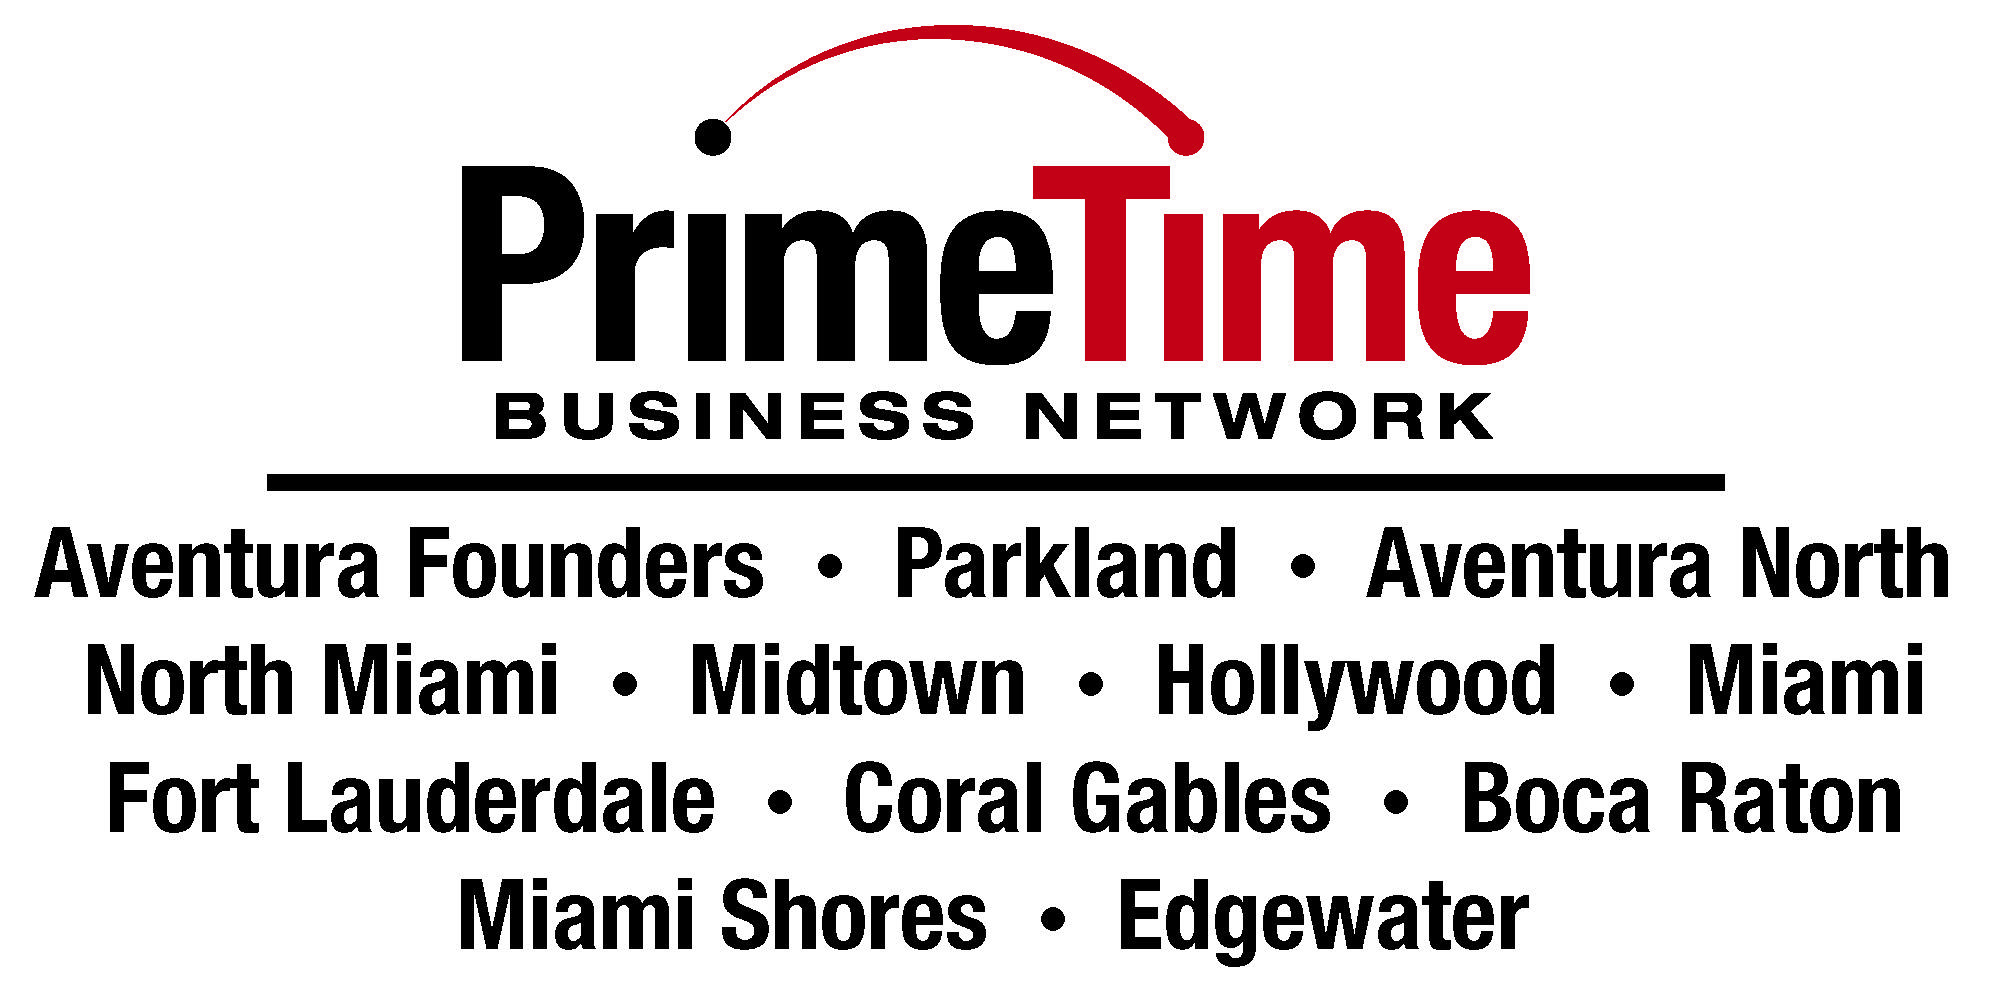 Prime Time Business Network Miami (Downtown)